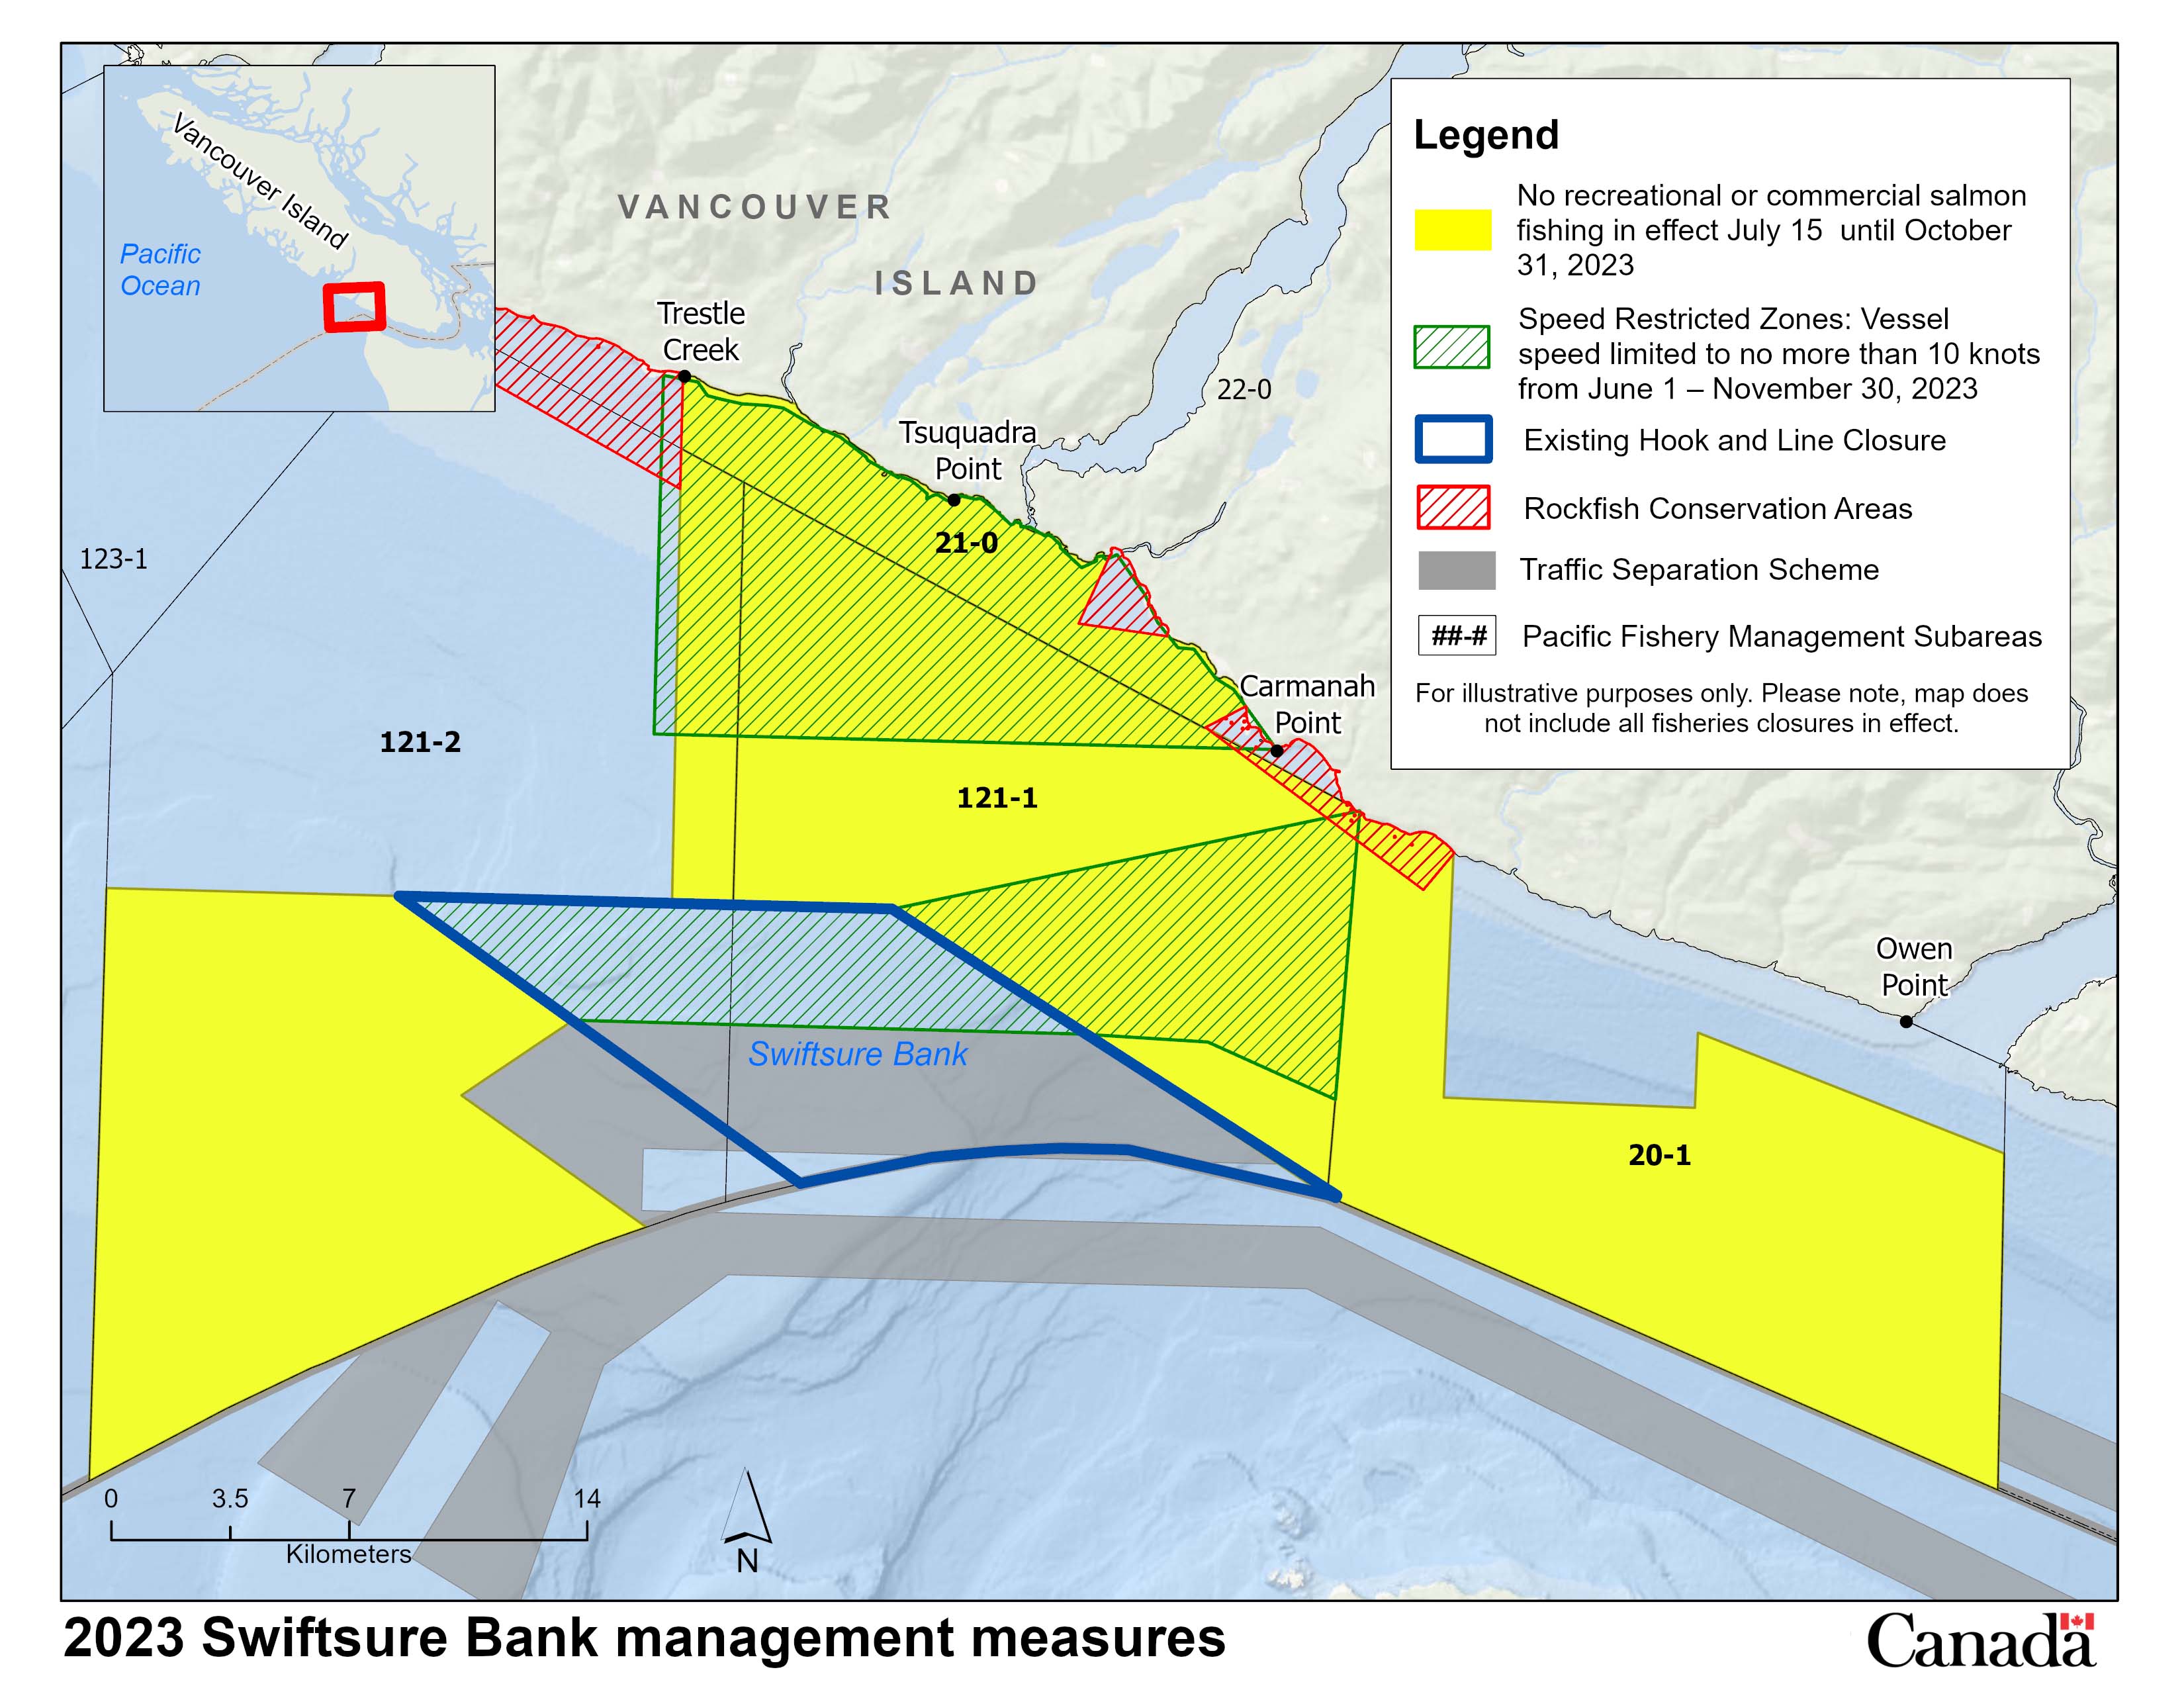 Map of management measures in Swiftsure Bank to support Southern Resident killer whale recovery